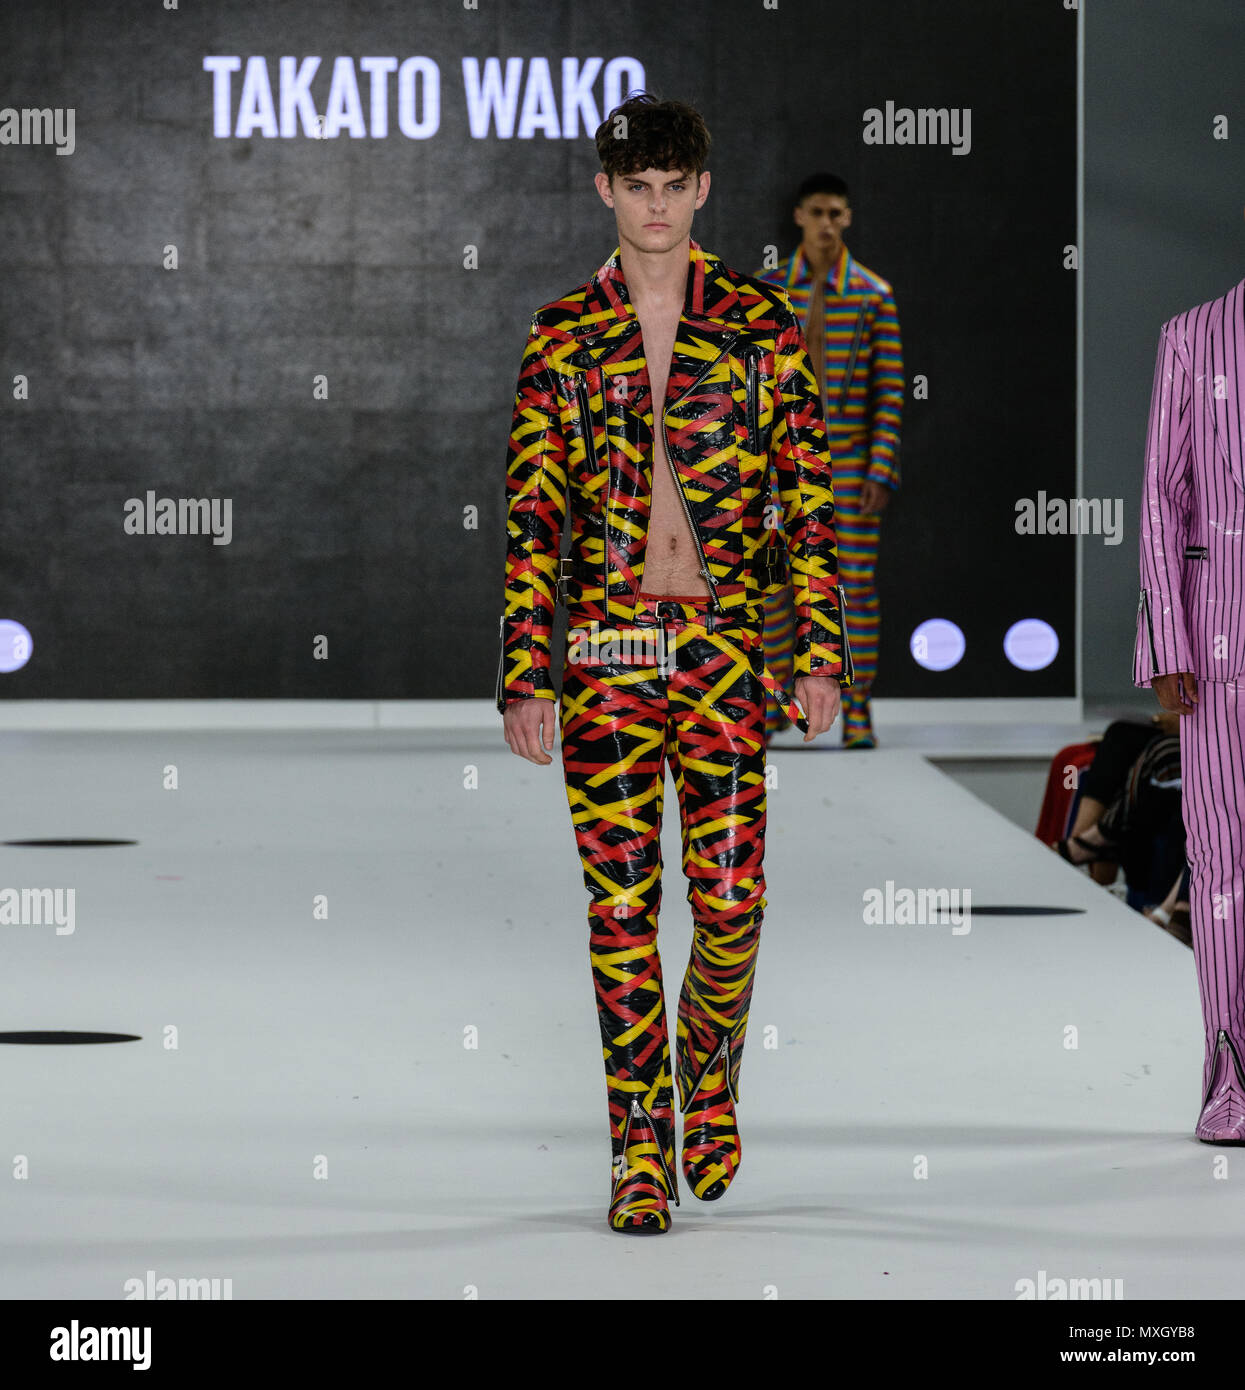 Takato Wako's brilliant Vynl Mens Collection shown at Nottingham Trents show at Graduate Fashion Week in London 2018 Credit: Marc Wainwright Photography/Alamy Live News Stock Photo